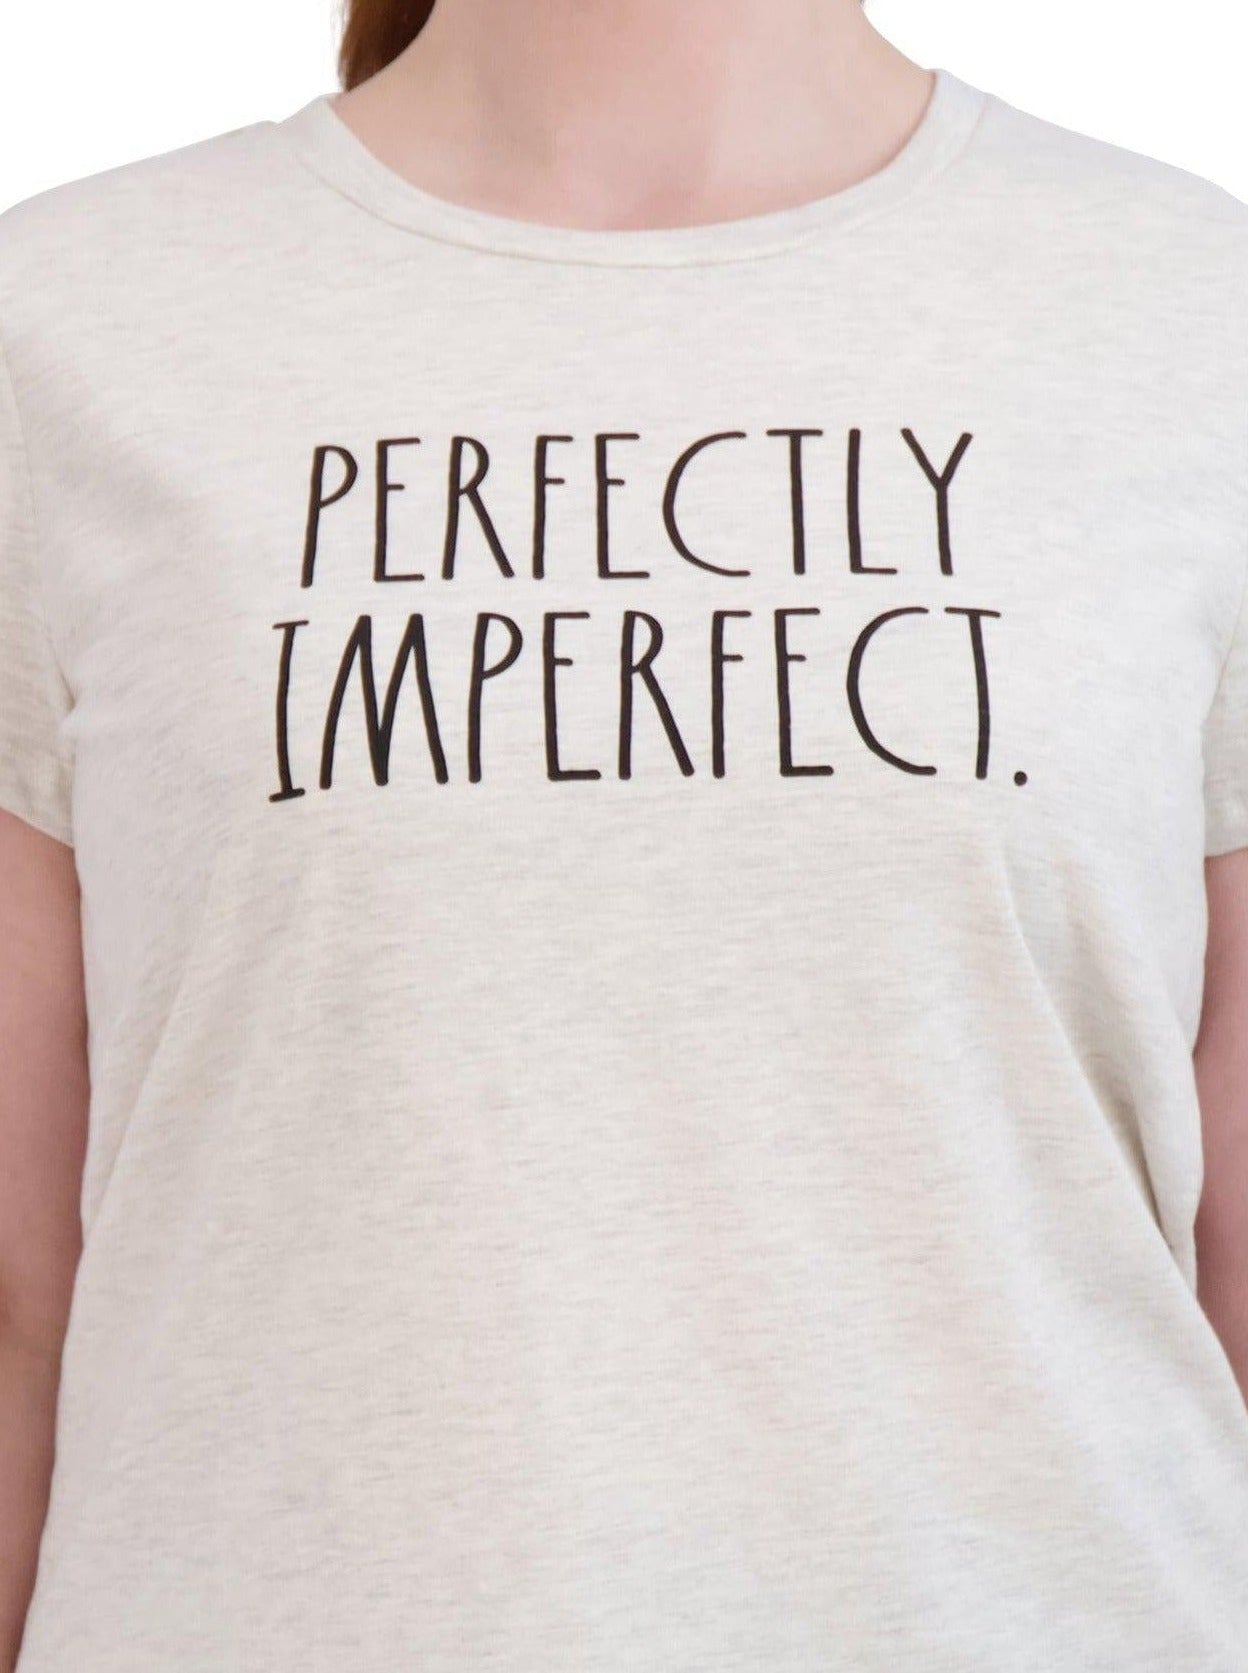 Women's "PERFECTLY IMPERFECT" Short Sleeve Icon T-Shirt - Rae Dunn Wear